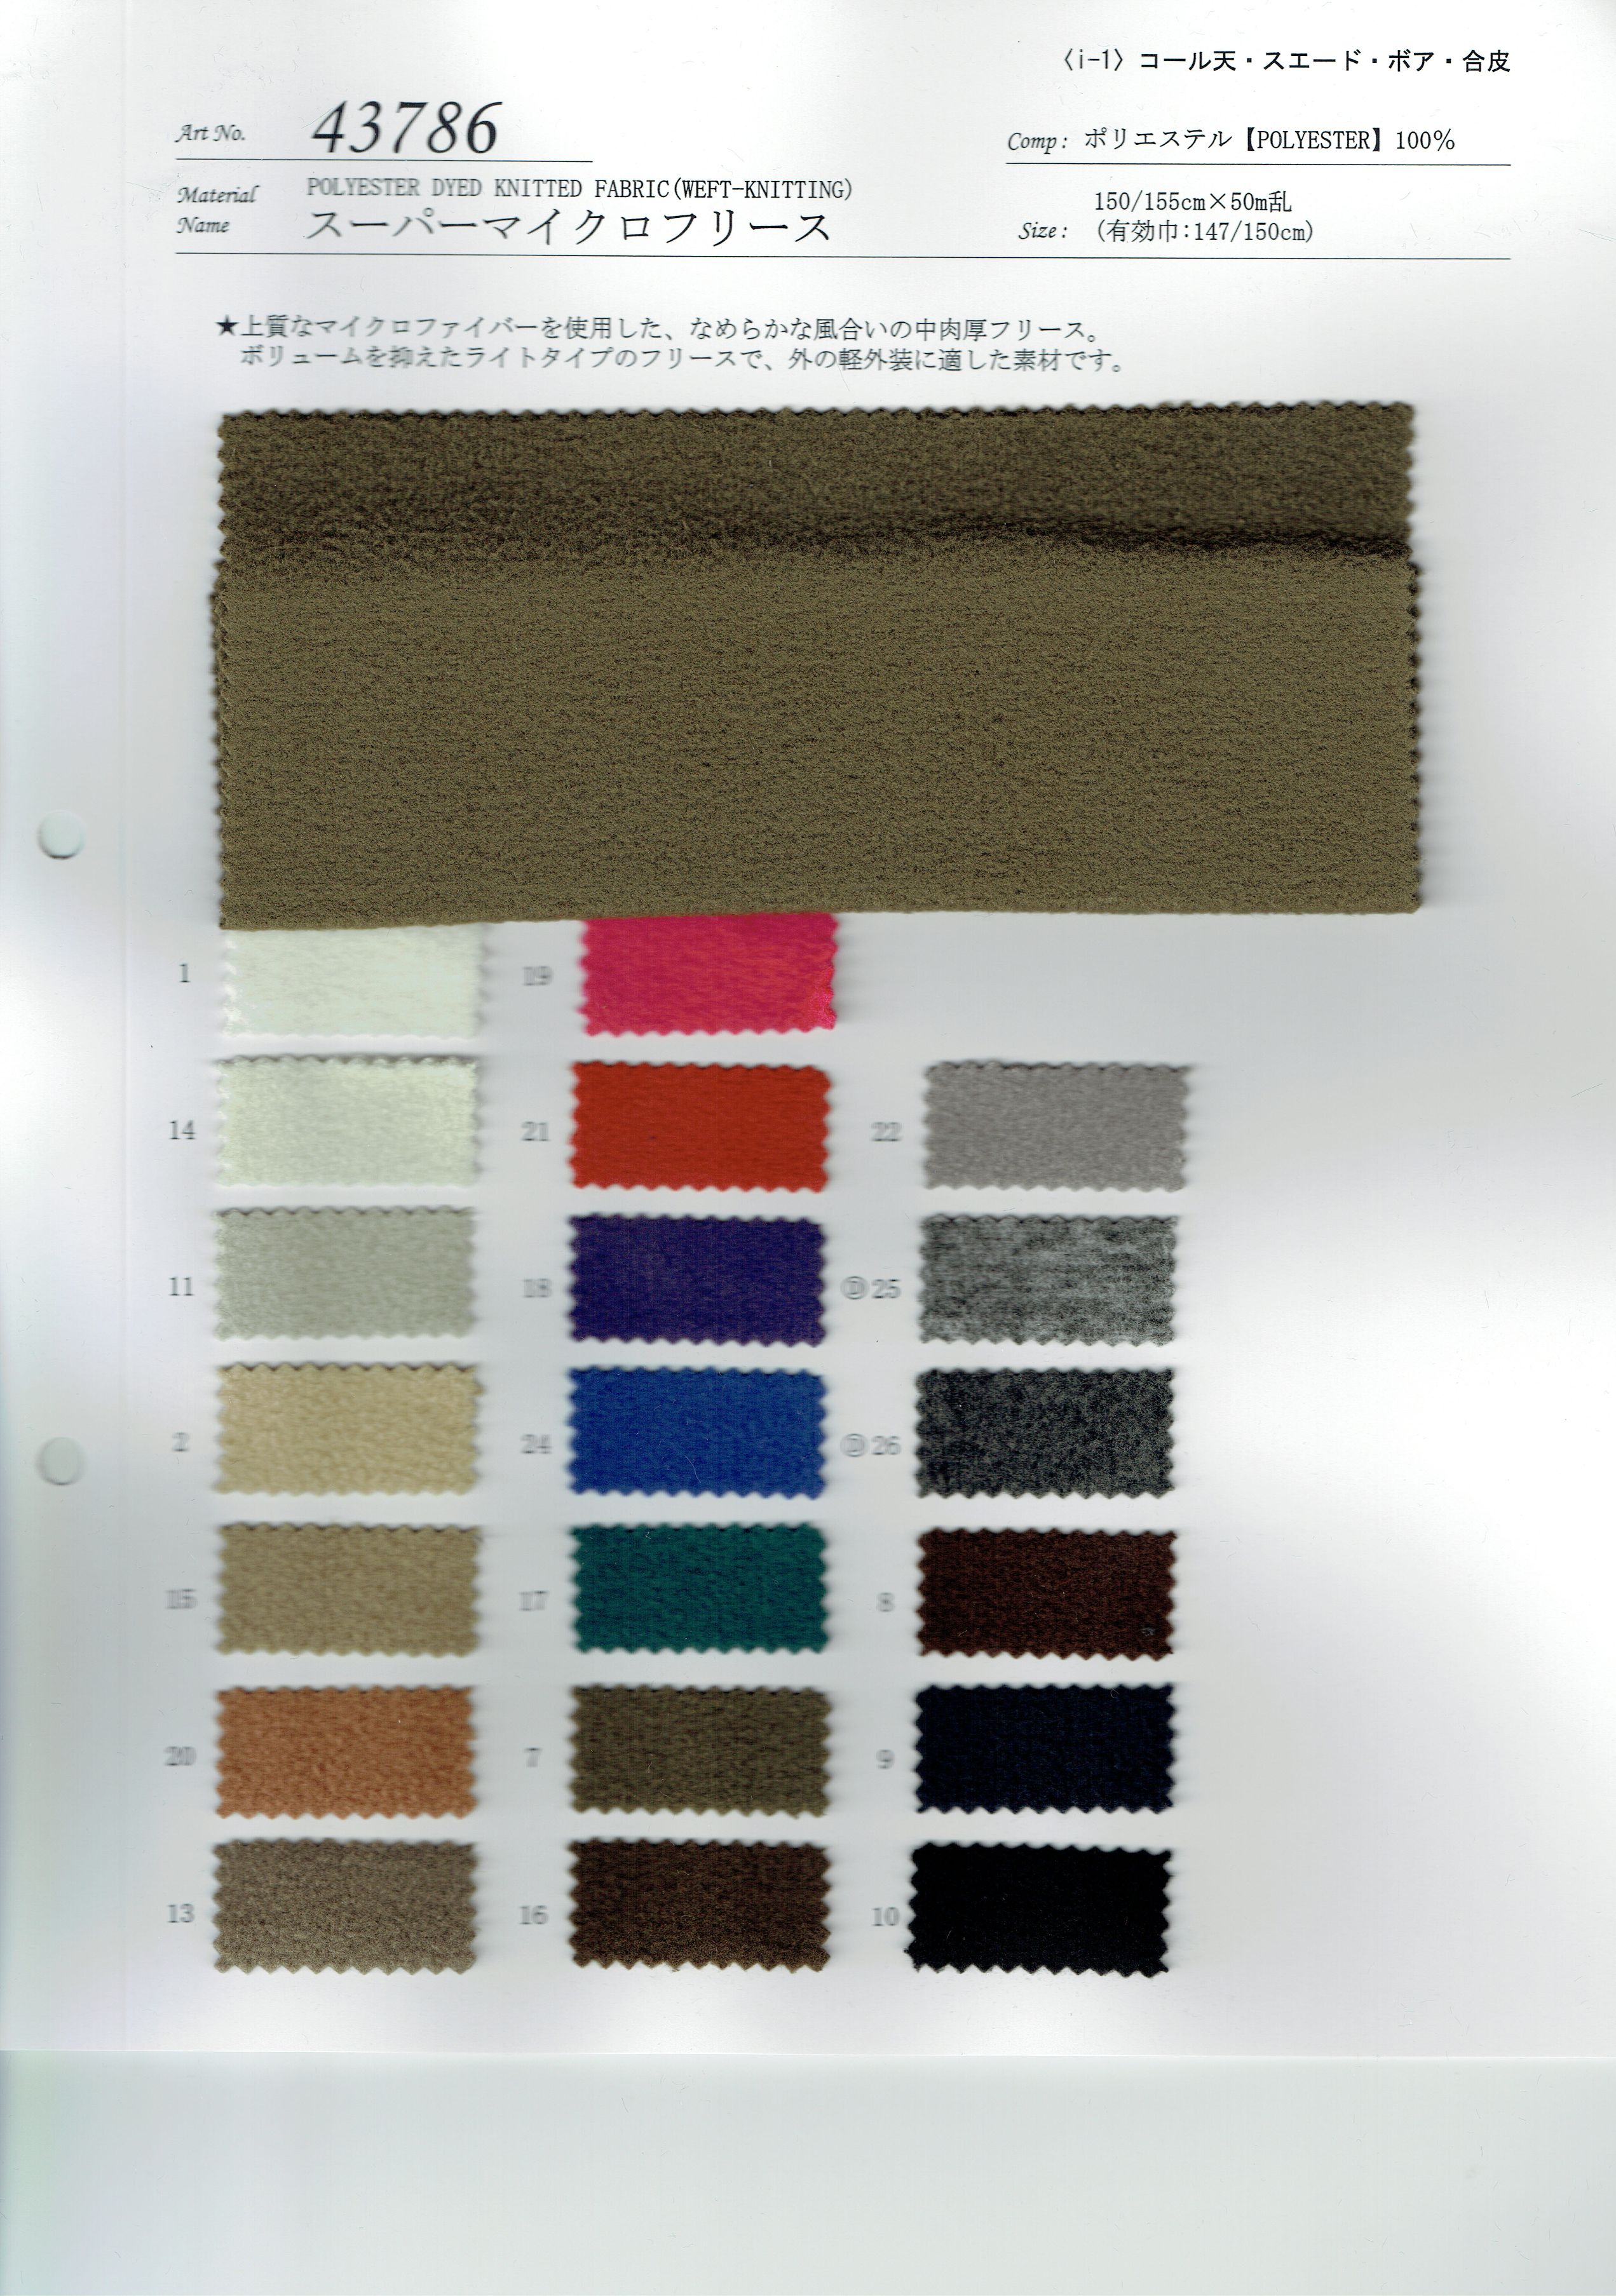 View POLYESTER100 DYED KNITTED FABRIC[WEFT-KNITTING] DYED KNITTED FABRIC[WEFT-KNITTING]